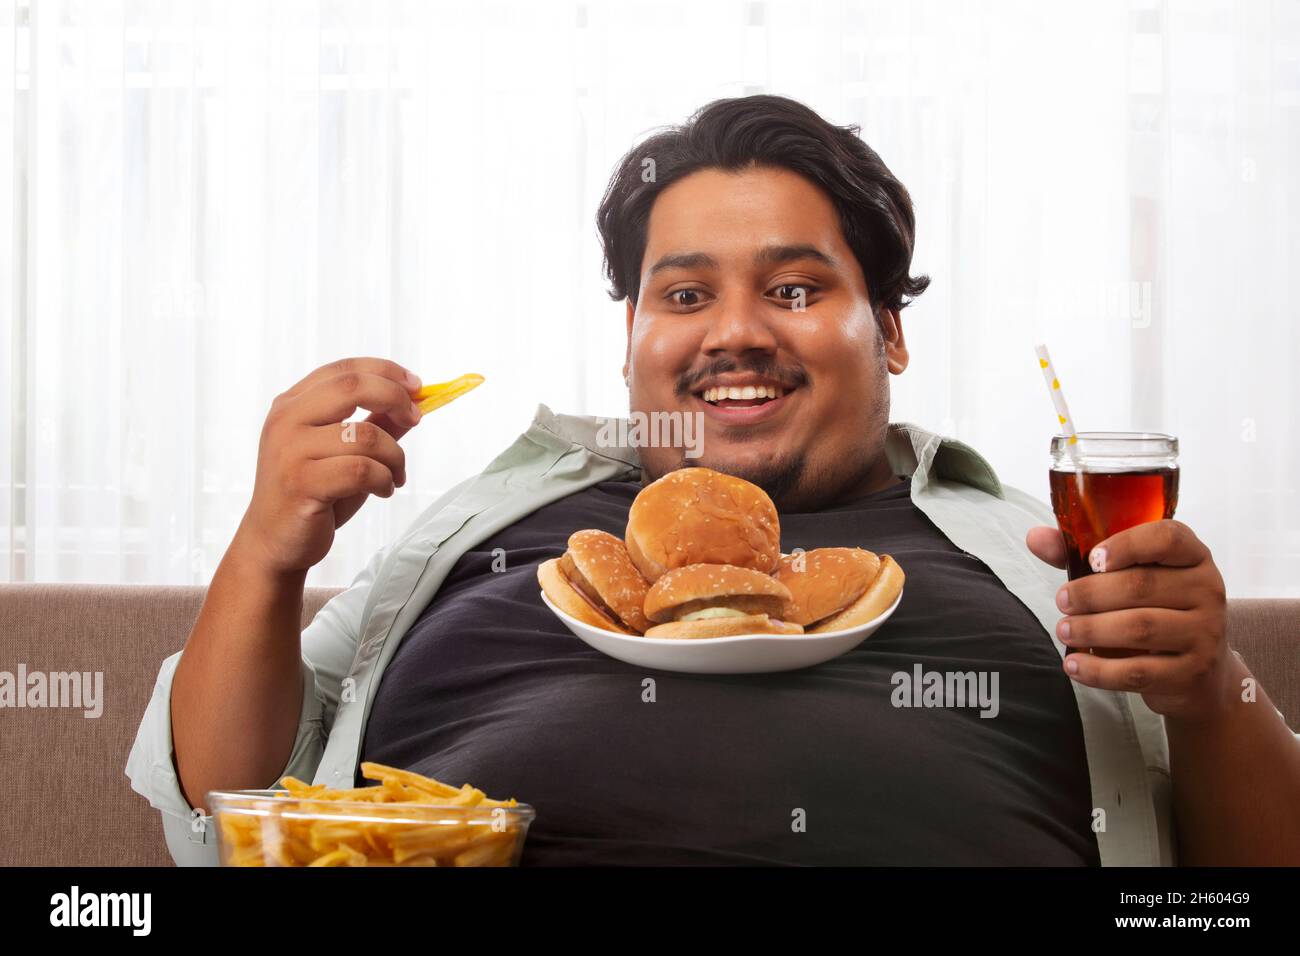 A fat man smiling while sitting in his room with junk food In his hand and on chest. Stock Photo